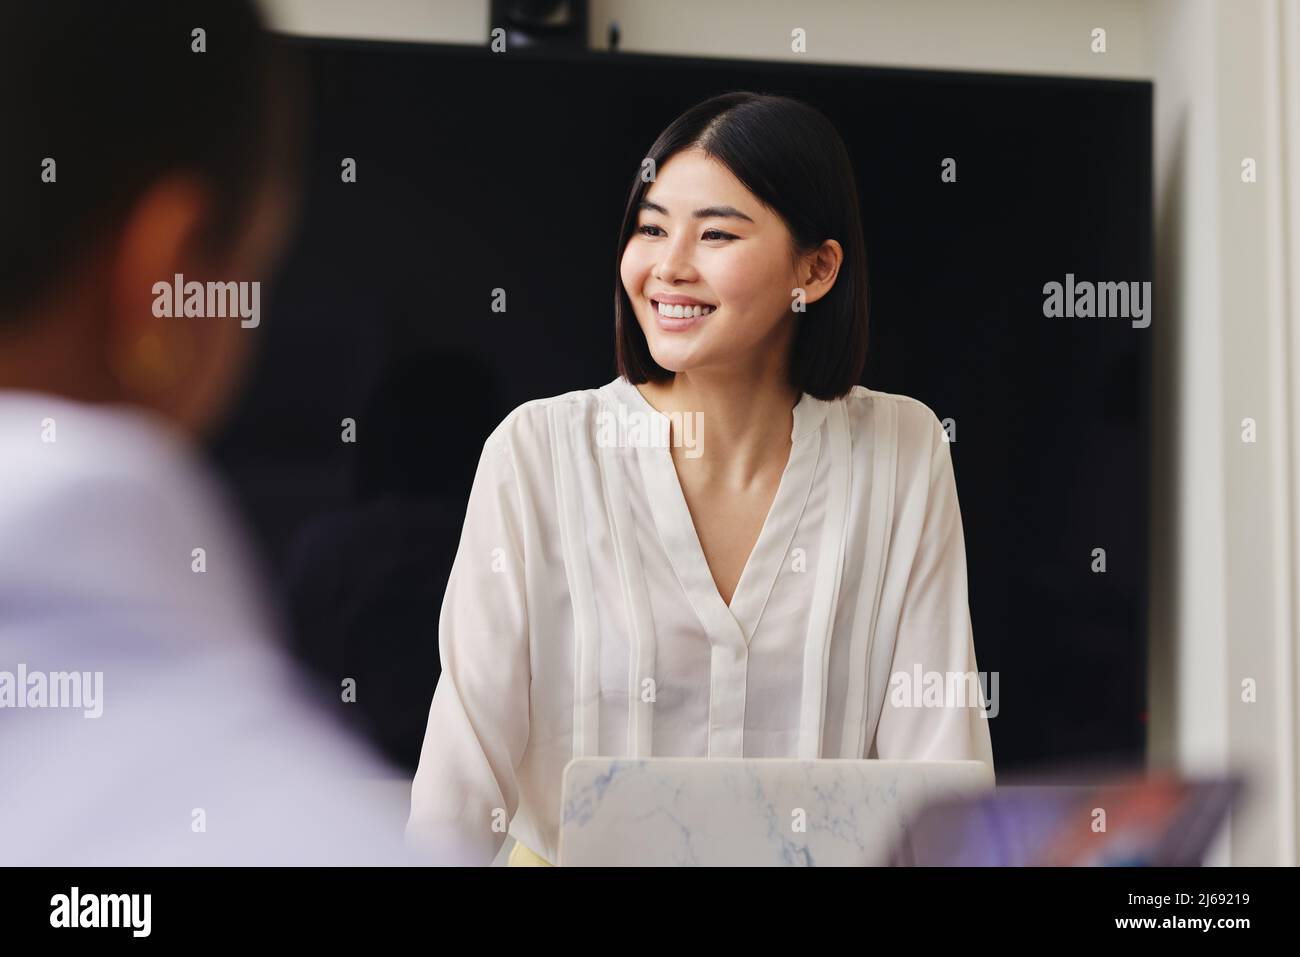 Portrait of cheerful mid adult Chinese businesswoman smiling in business meeting with confident expression Stock Photo